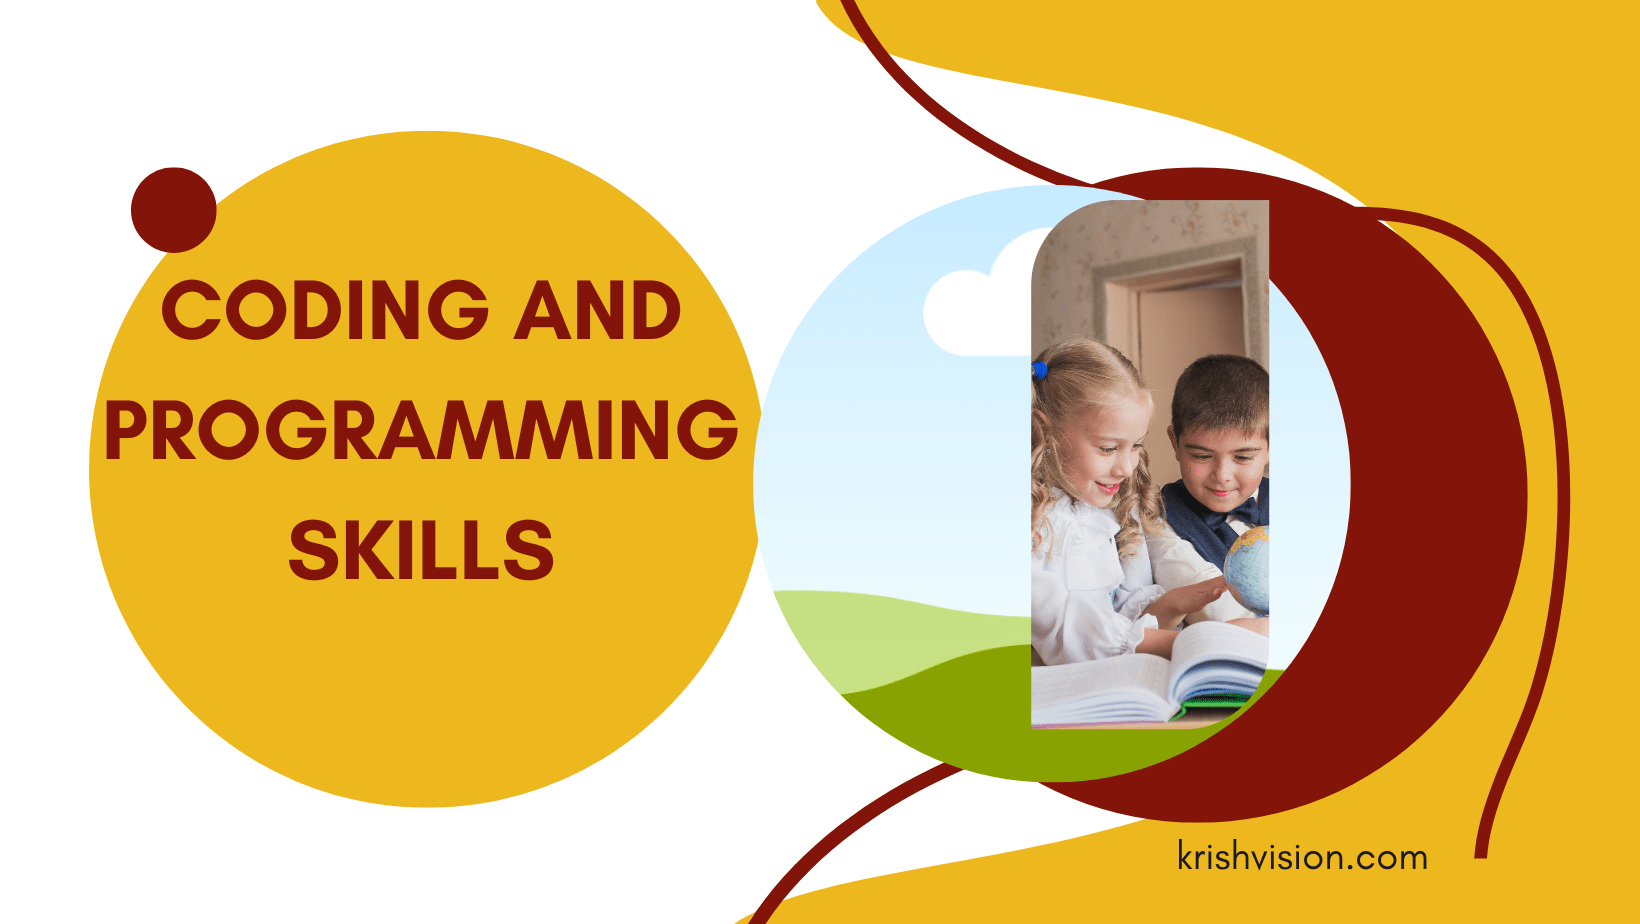 Technology Skills for Kids and Teens